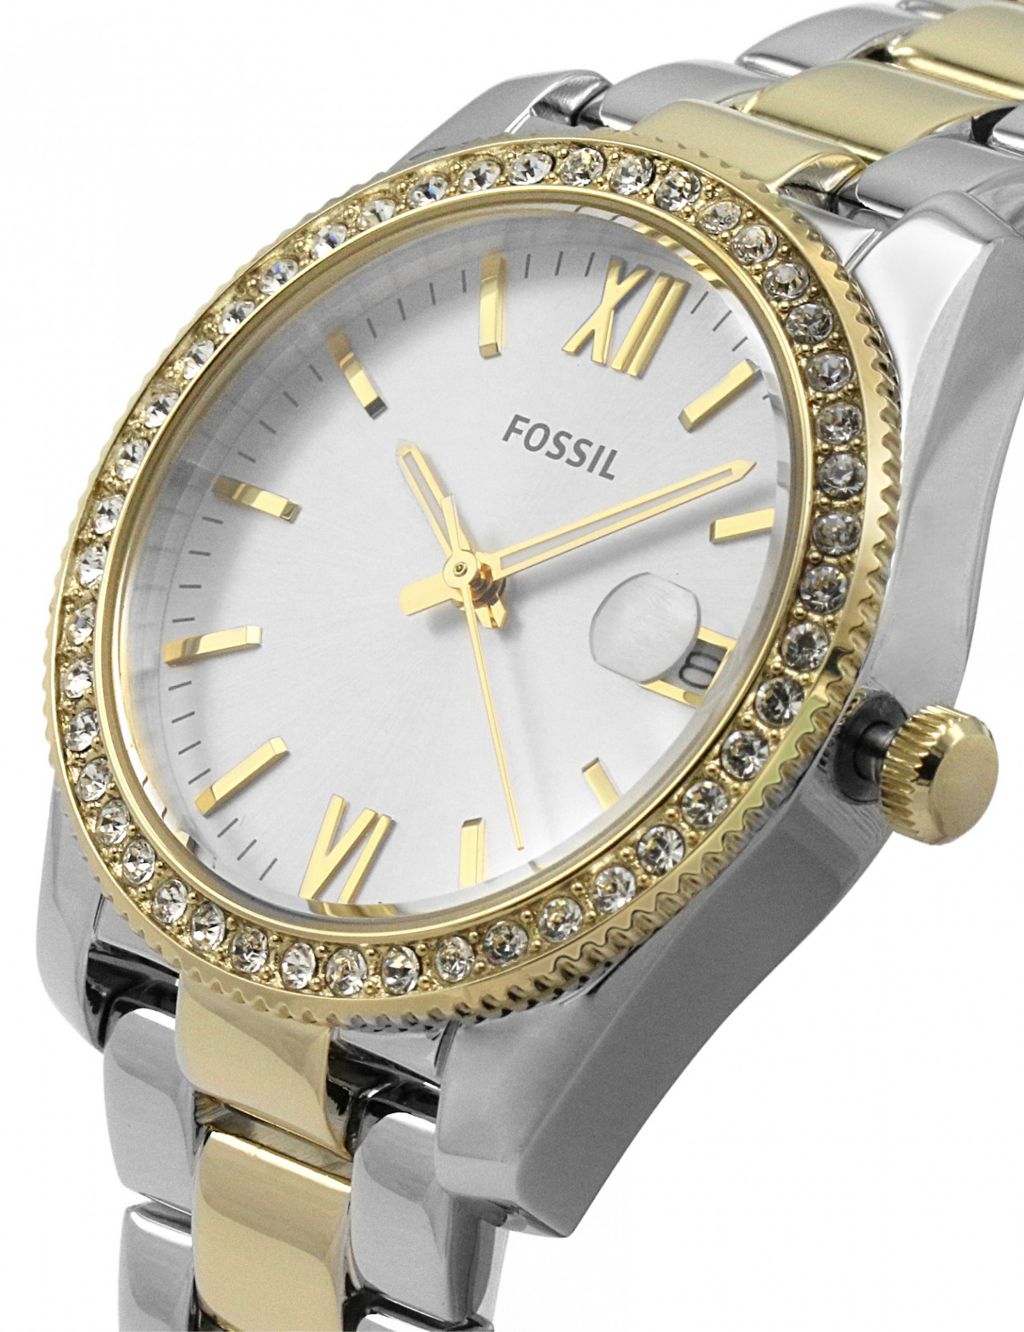 Fossil Scarlette Stainless Steel Watch image 3